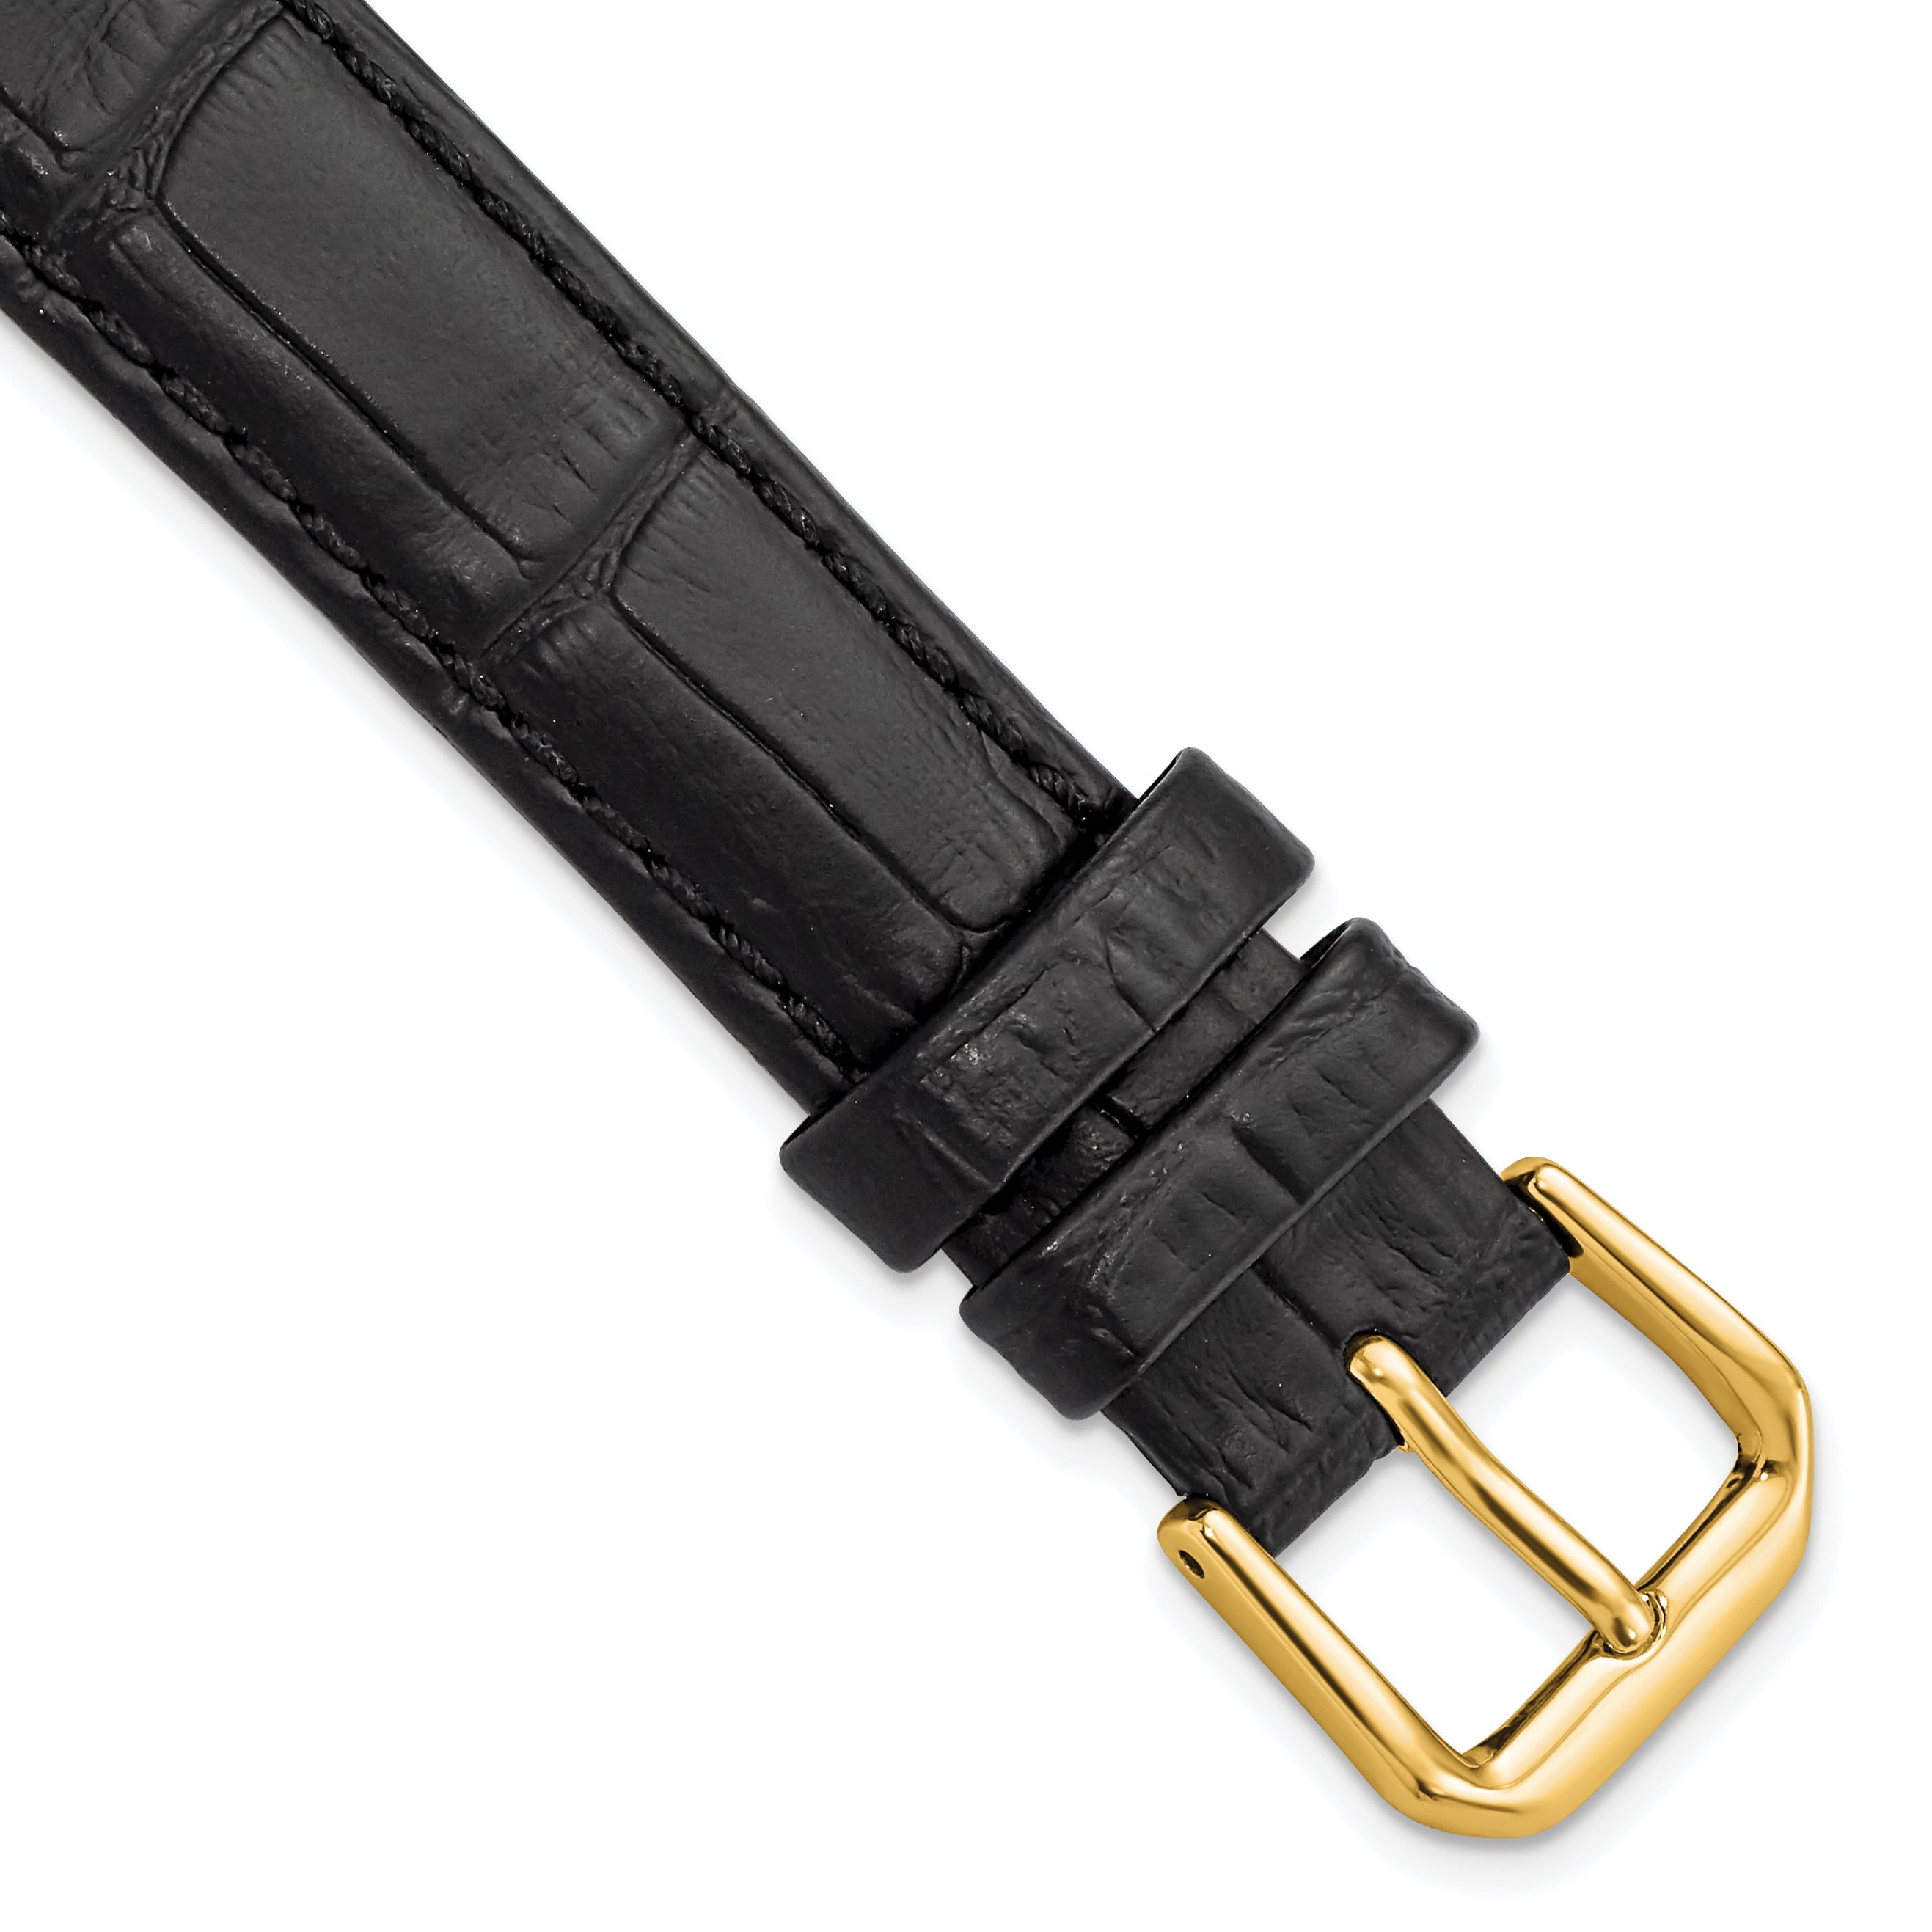 DeBeer 16mm Black Matte Wild Alligator Grain Leather with Gold-tone Buckle 7.5 inch Watch Band